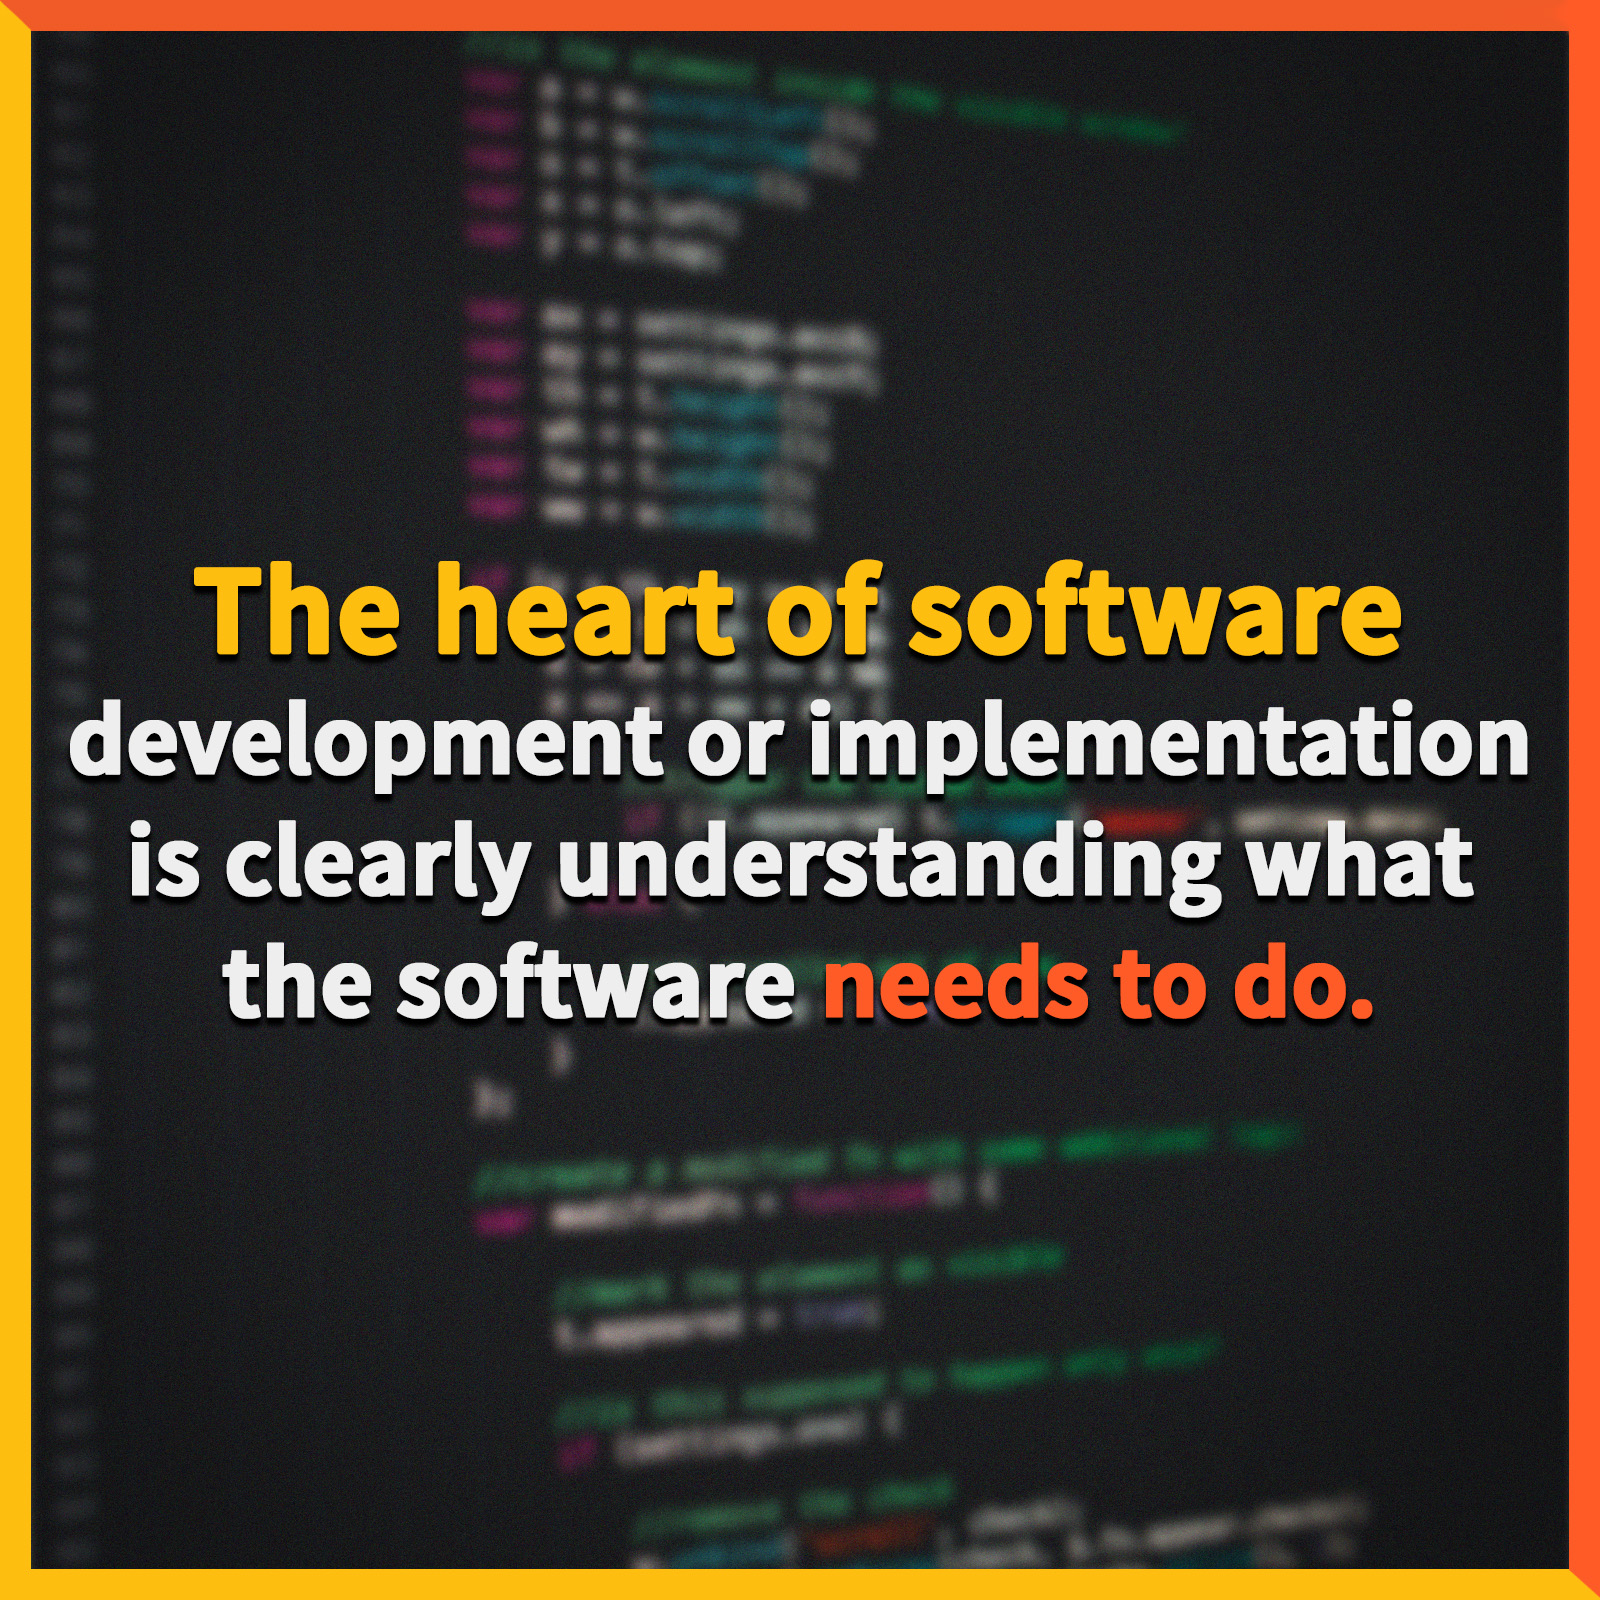 what does the software need to do